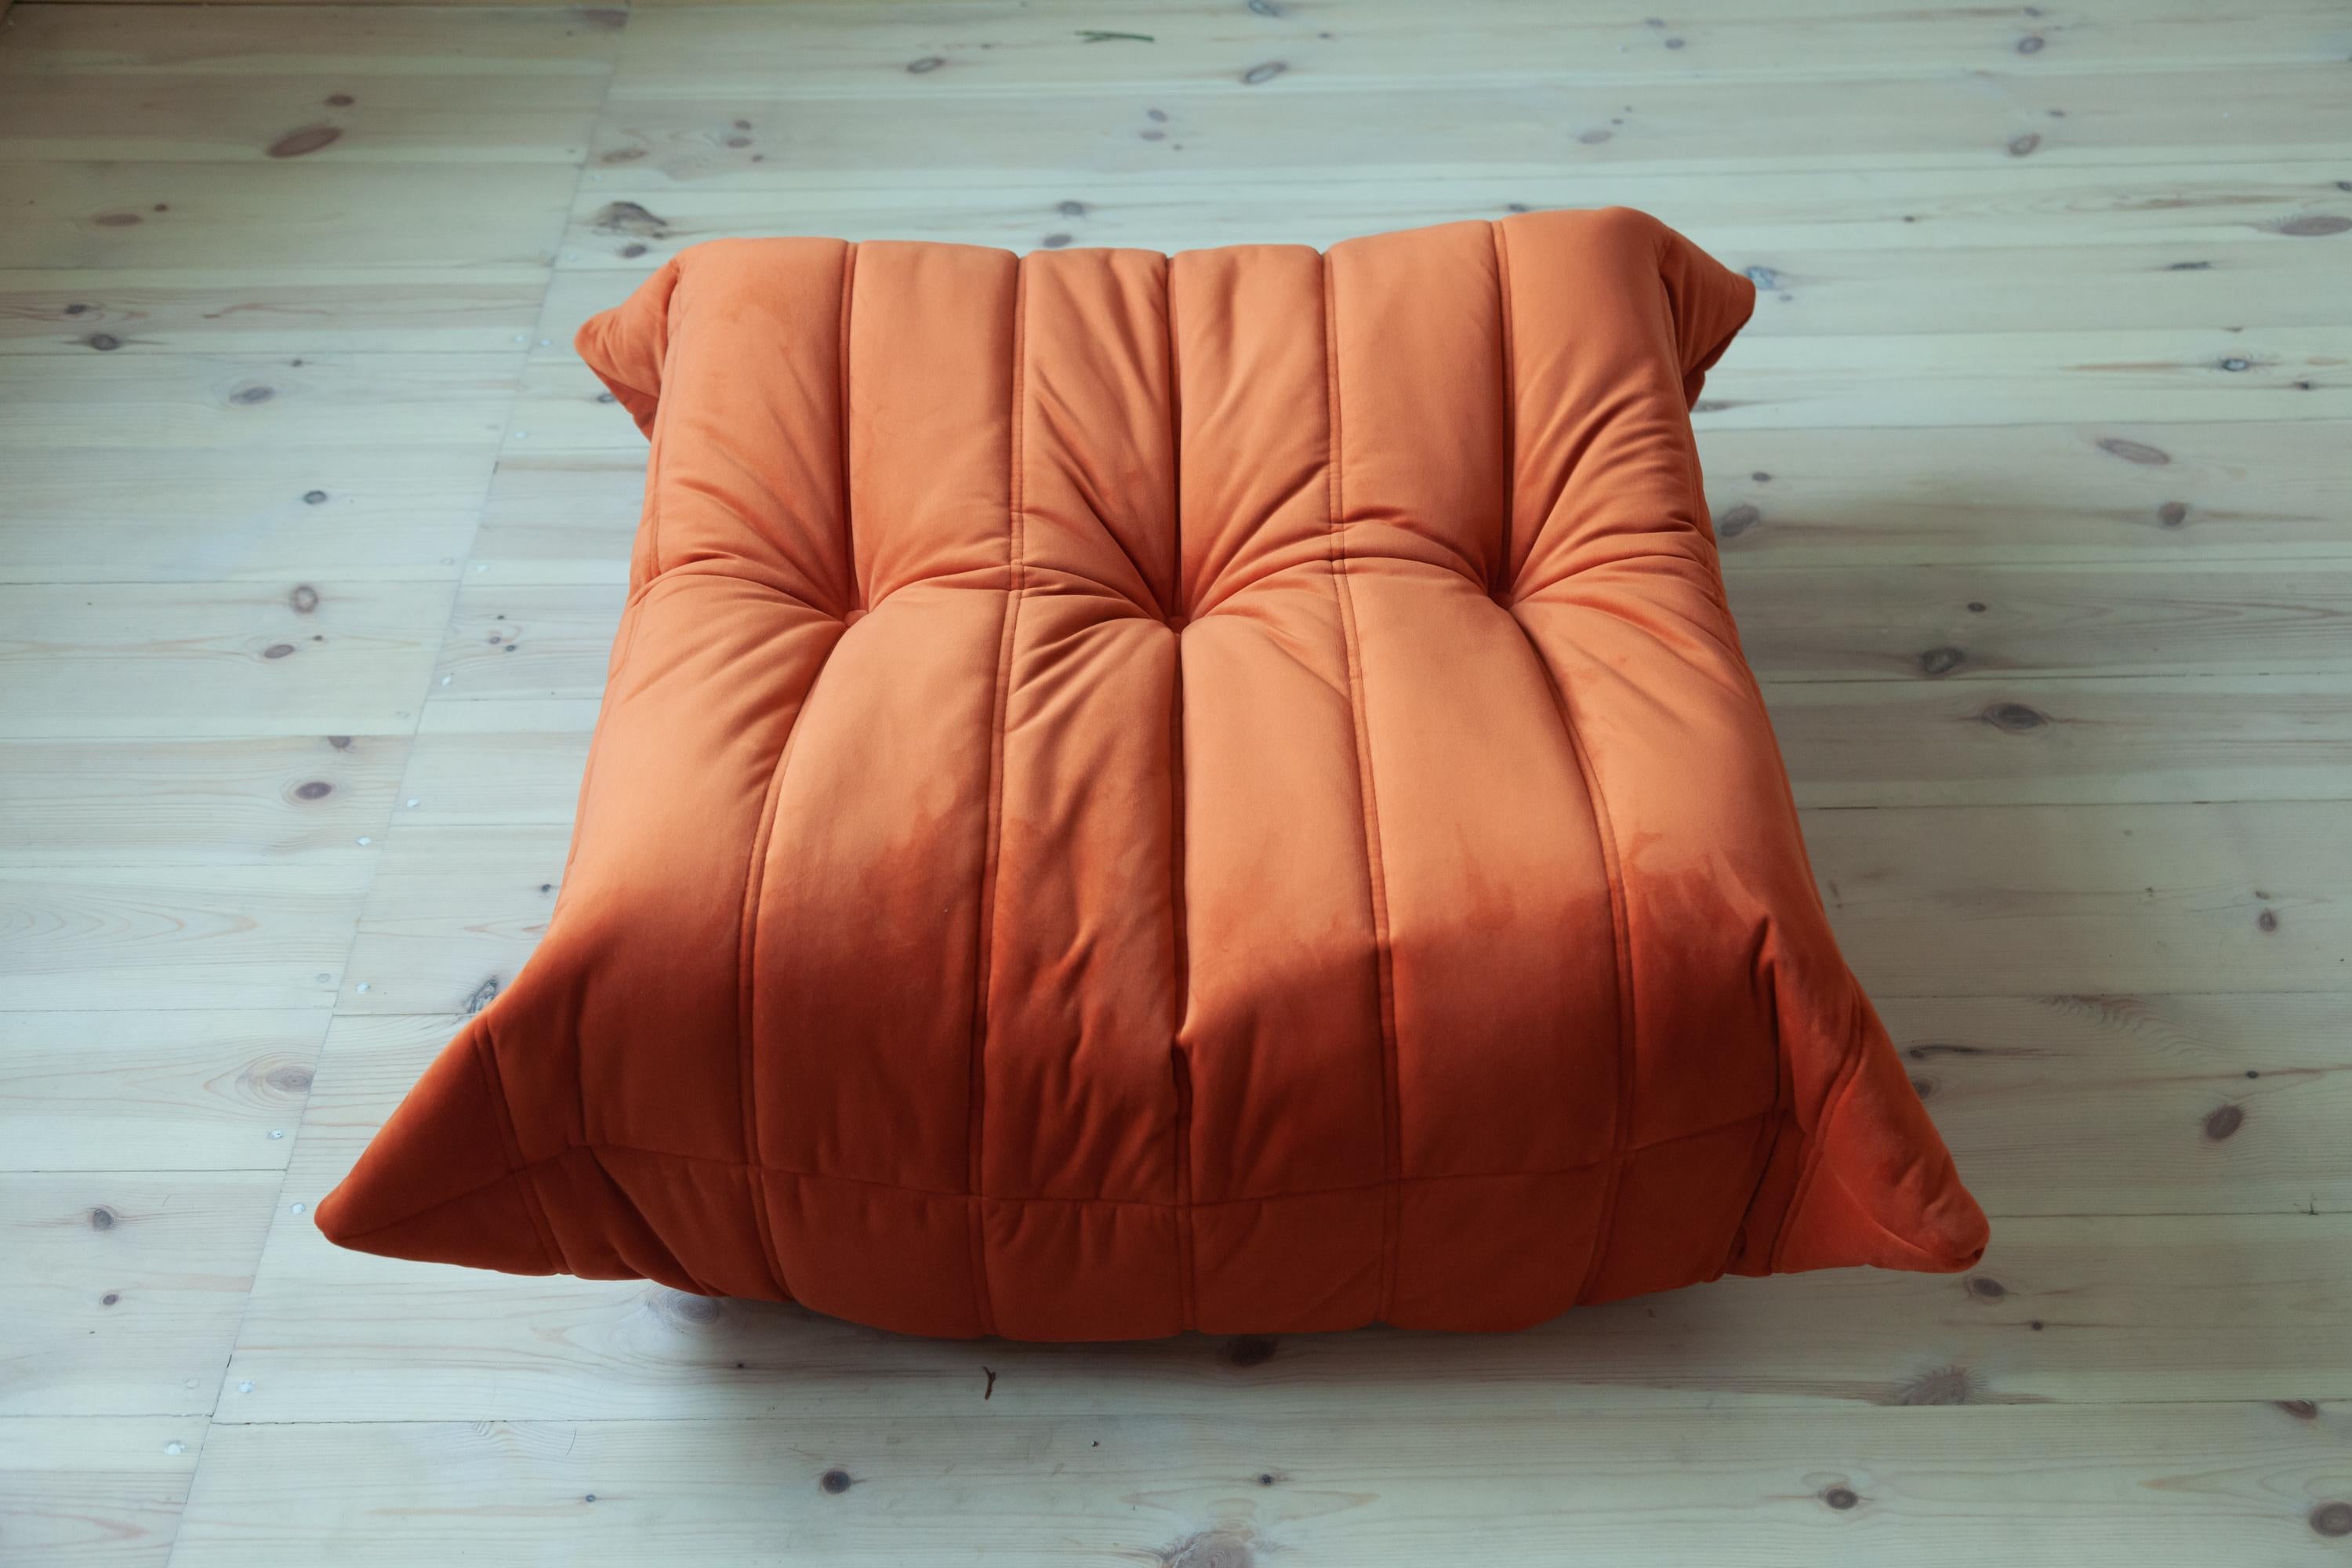 This Togo ottoman was designed by Michel Ducaroy in 1973 and was manufactured by Ligne Roset in France. It has been reupholstered in new orange velvet (87 x 80 x 34 cm). It has the original Ligne Roset logo and genuine Ligne Roset bottom.